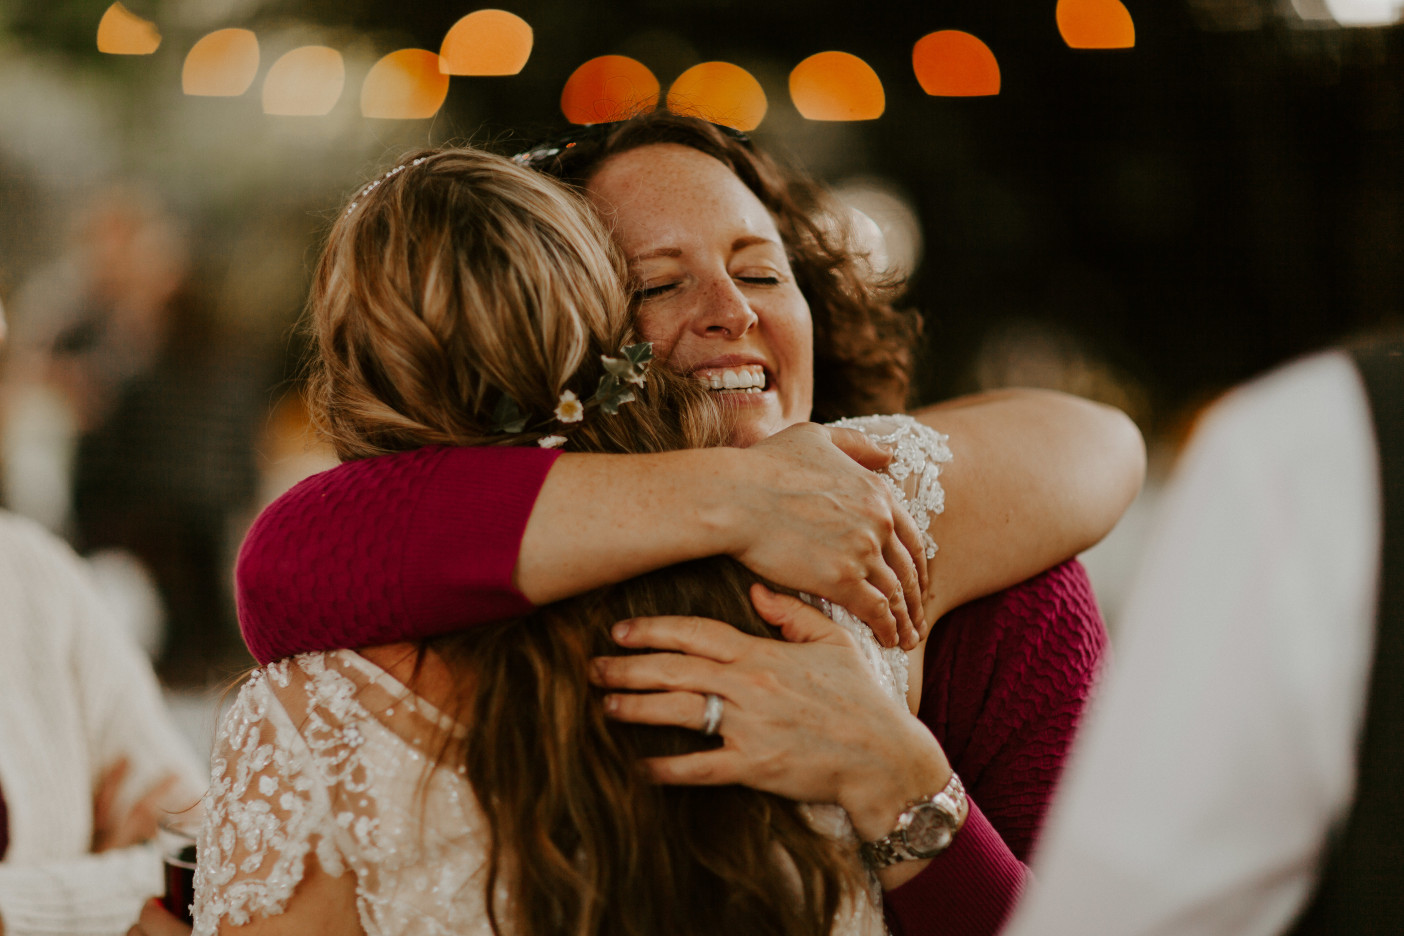 Hannah hugs a guest in Corvallis, Oregon. Intimate wedding photography in Corvallis Oregon by Sienna Plus Josh.